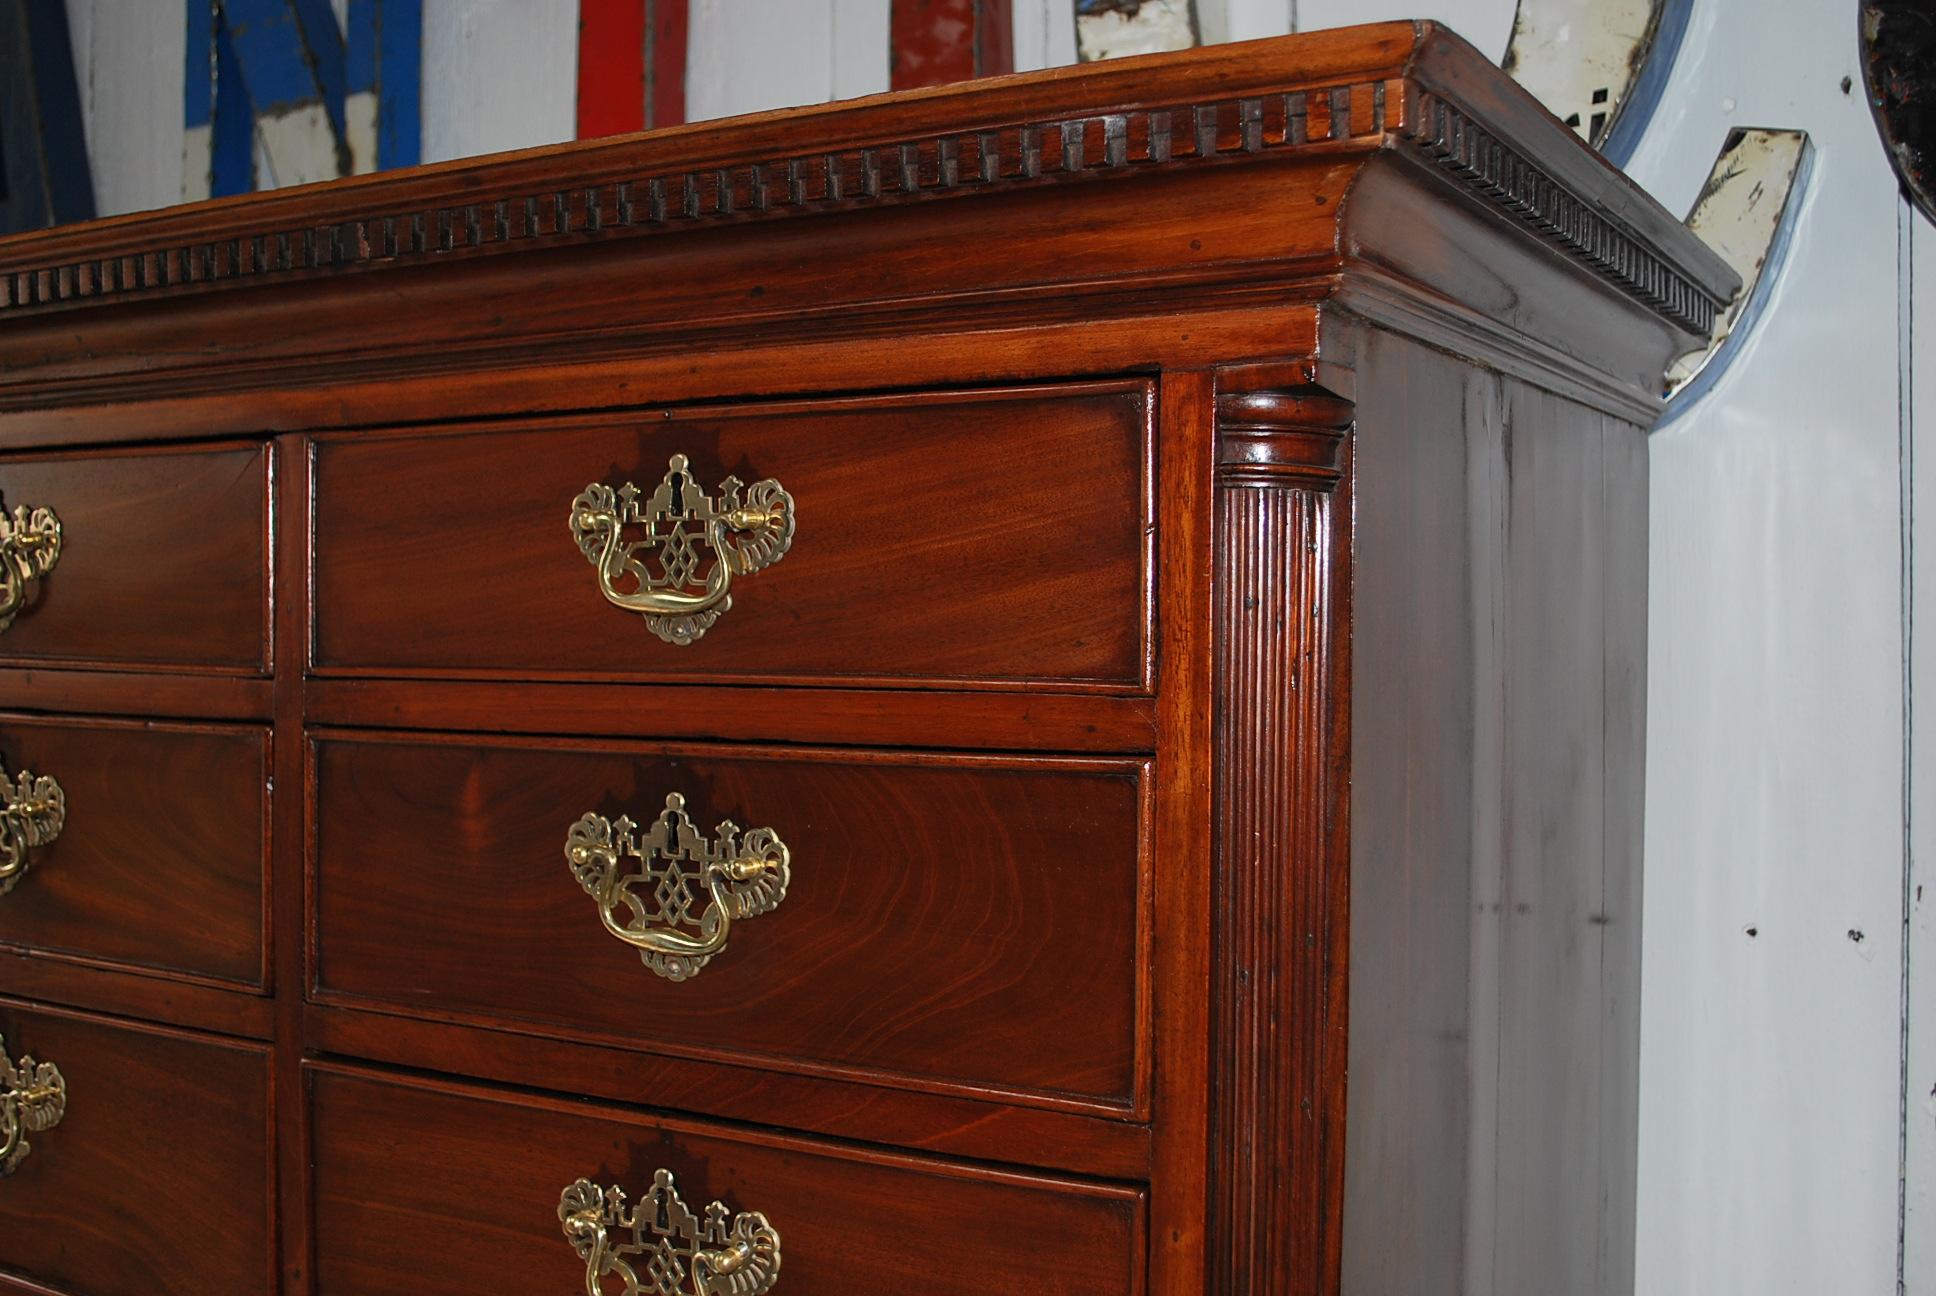 This is a rare and unusual Chippendale period mahogany tallboy / chest on chest. Standing on bracket feet with a dentil cornice. This is a very unusual piece to have these quoin decoration going up the corners, which is attributed to the Lancashire